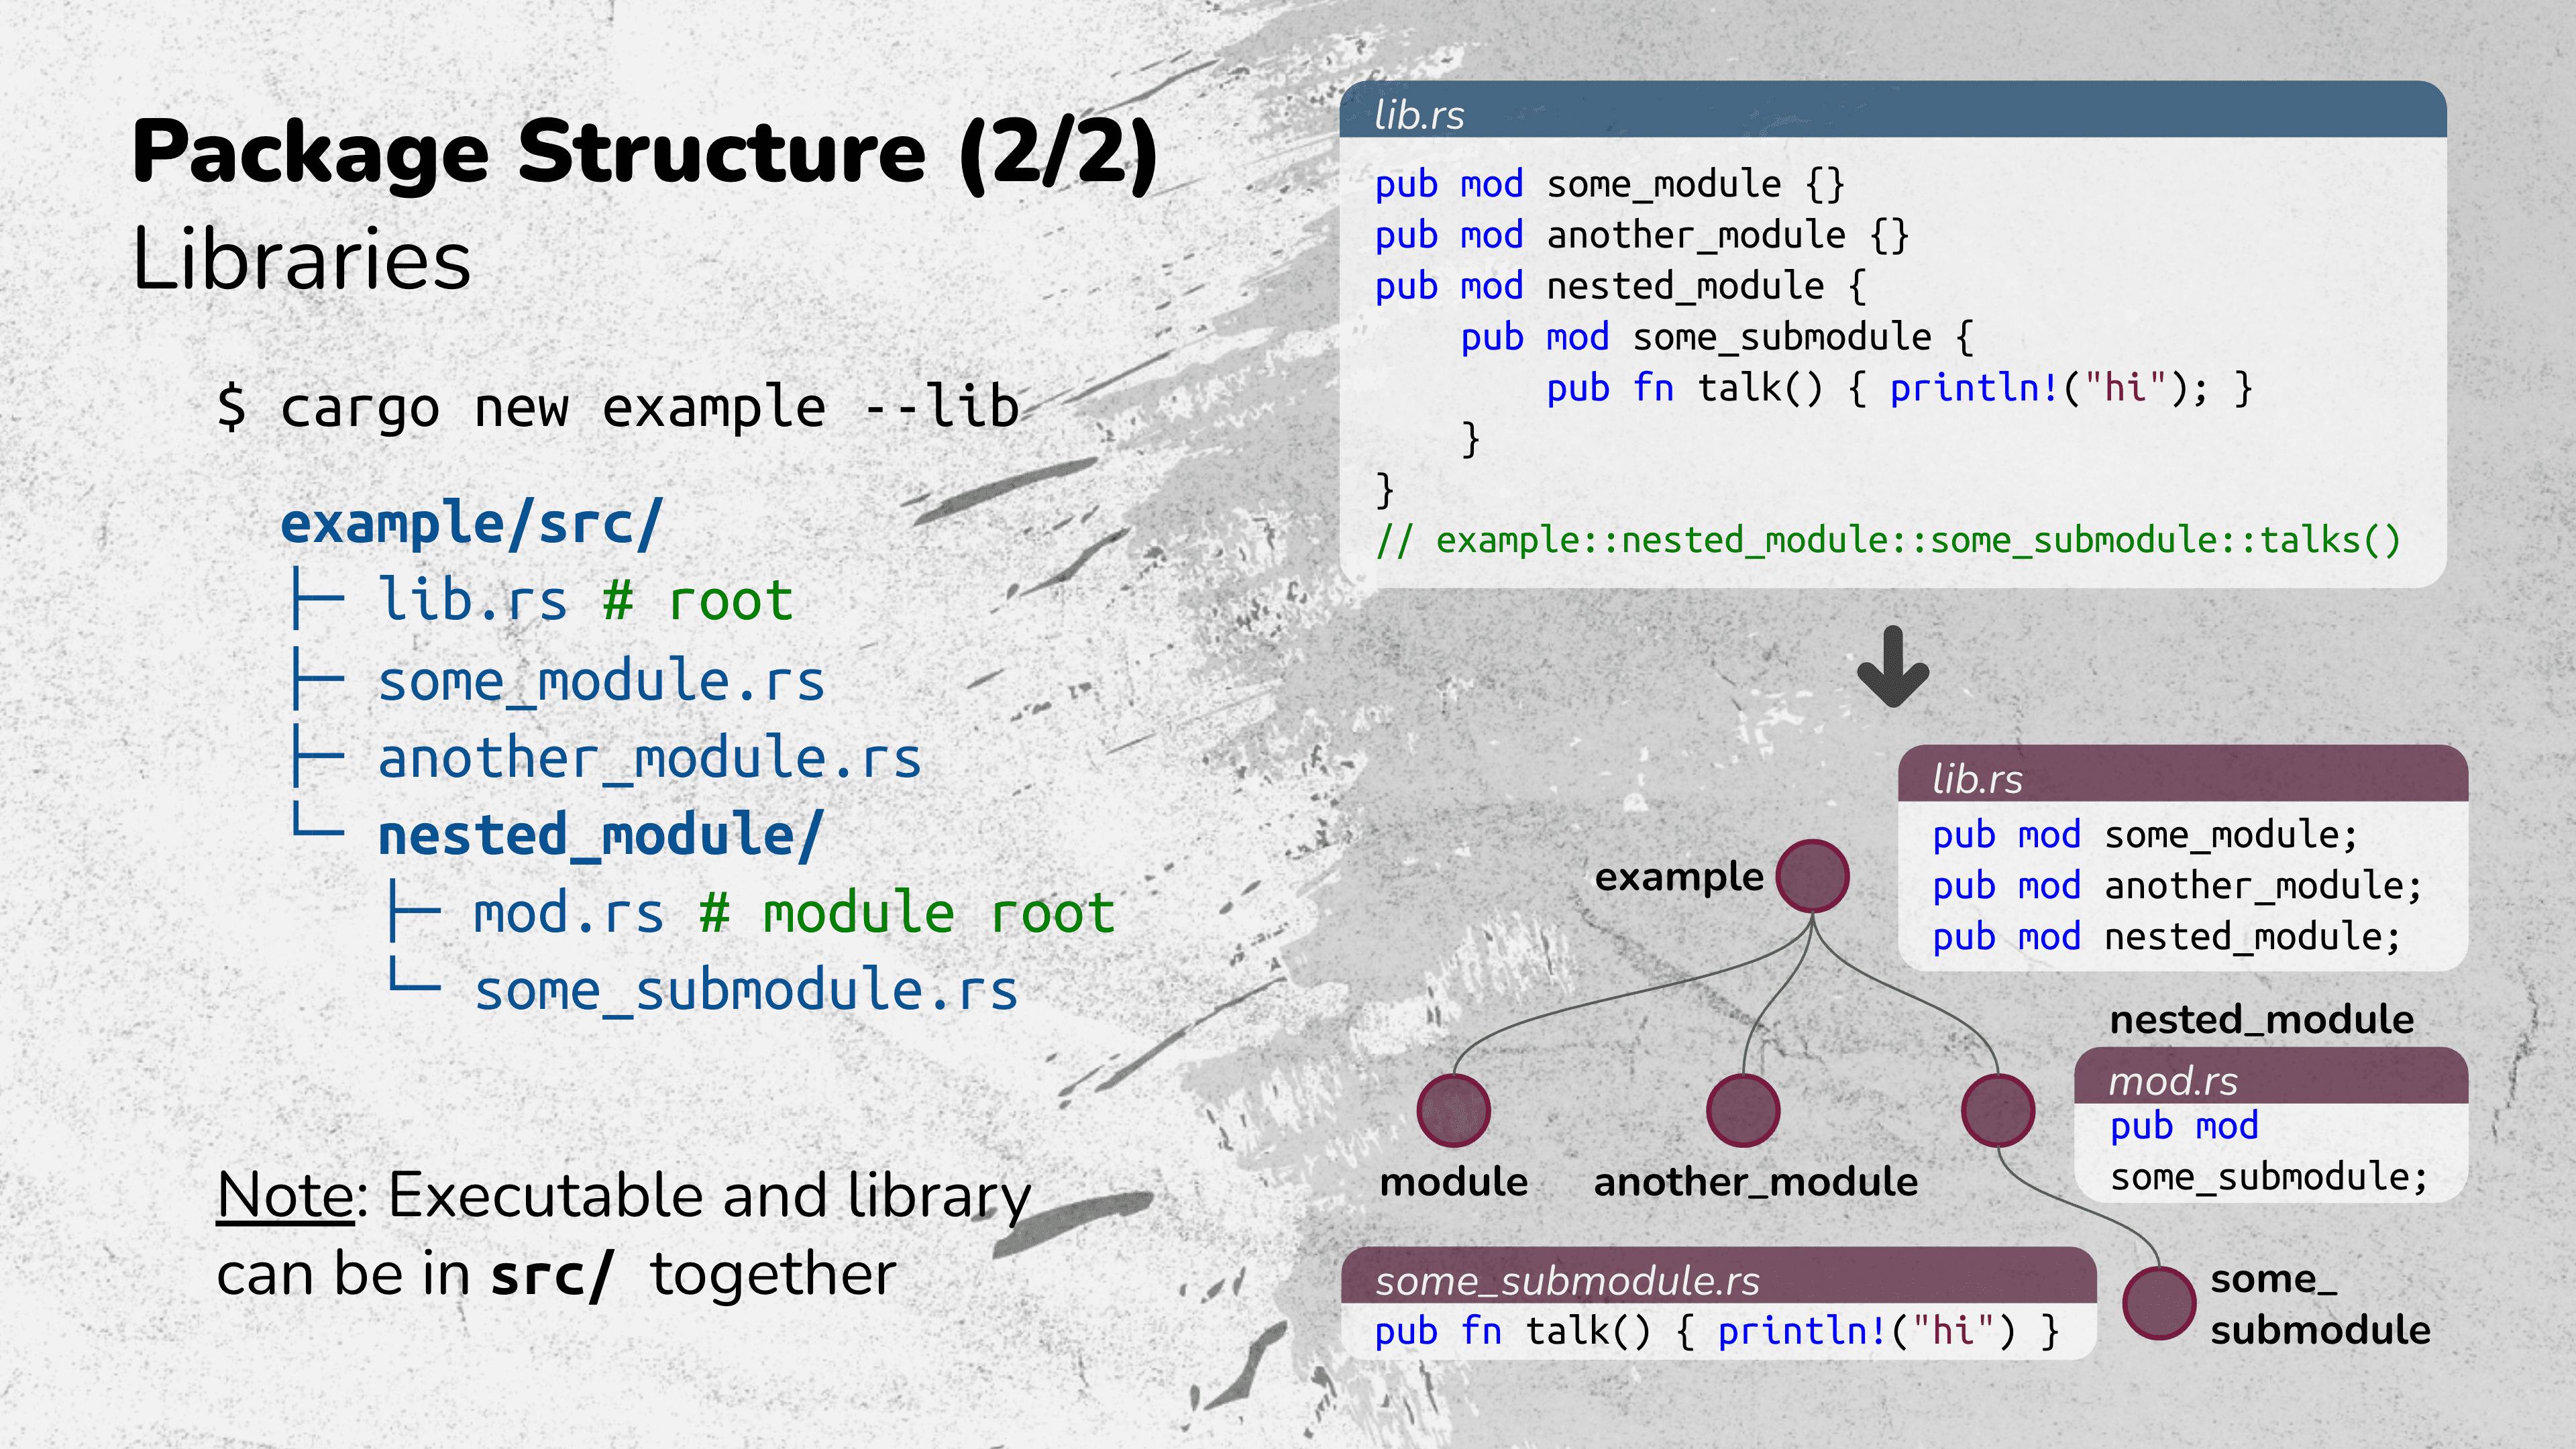 package-structure-libraries.png